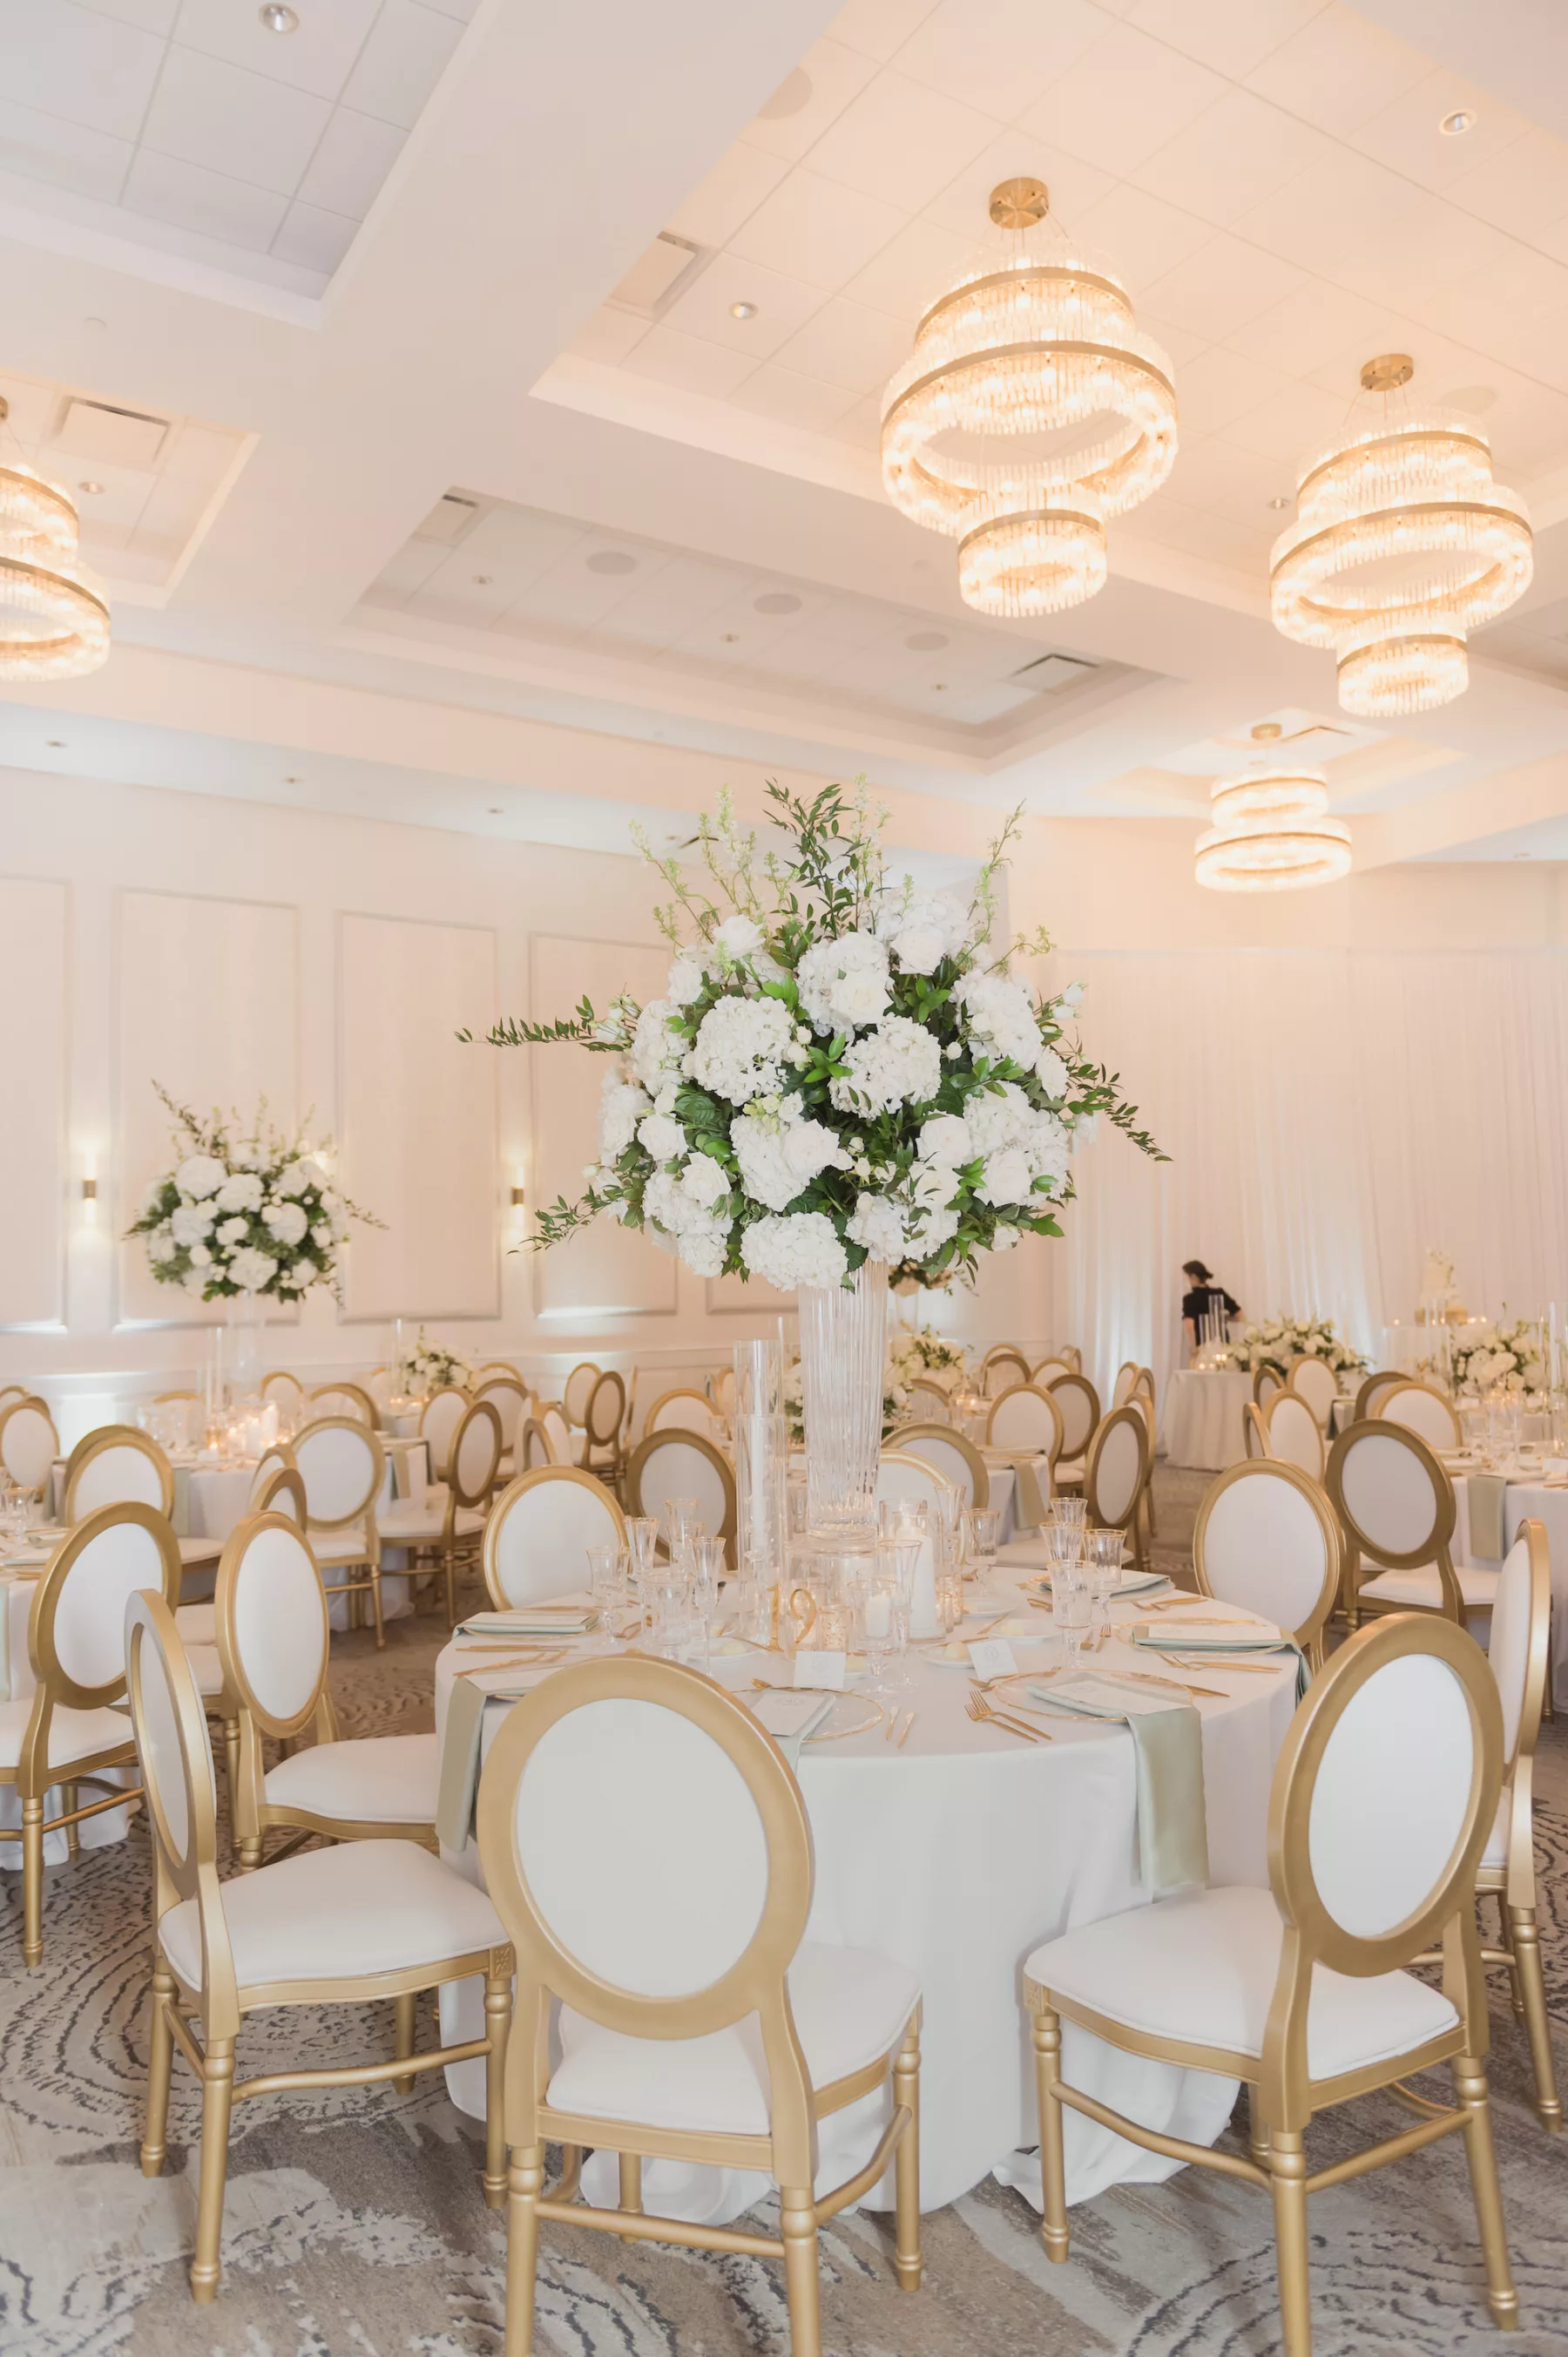 Classic White and Gold Spring Ballroom Wedding Reception Inspiration | Louis Chair Ideas | Tampa Bay Kate Ryan Event Rentals | Florist Bruce Wayne Florals | Planner Parties A' La Carte